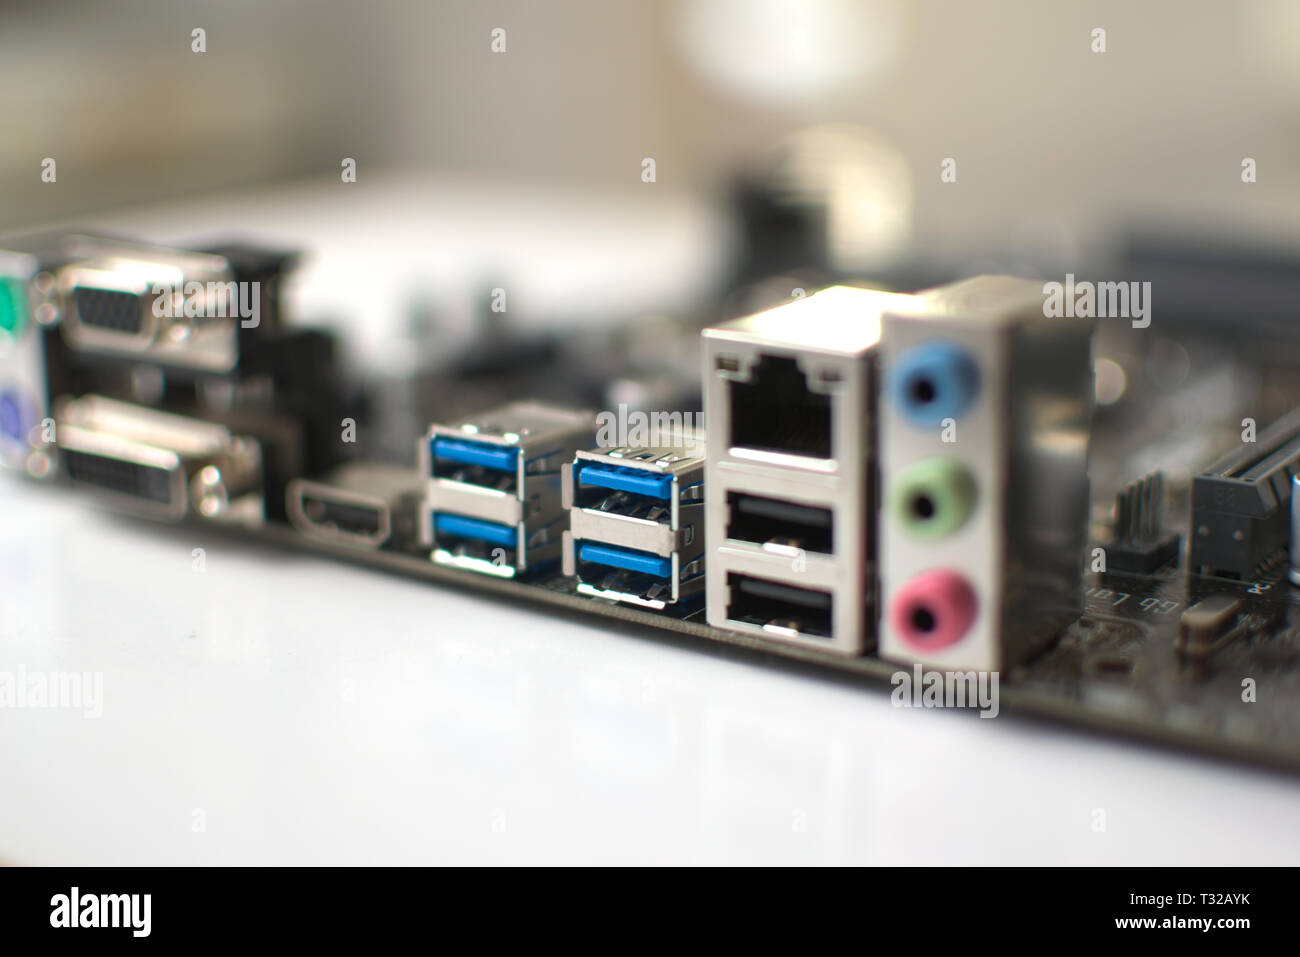 Modern computer ATX format motherboard. Back ports can be clearly seen. Stock Photo